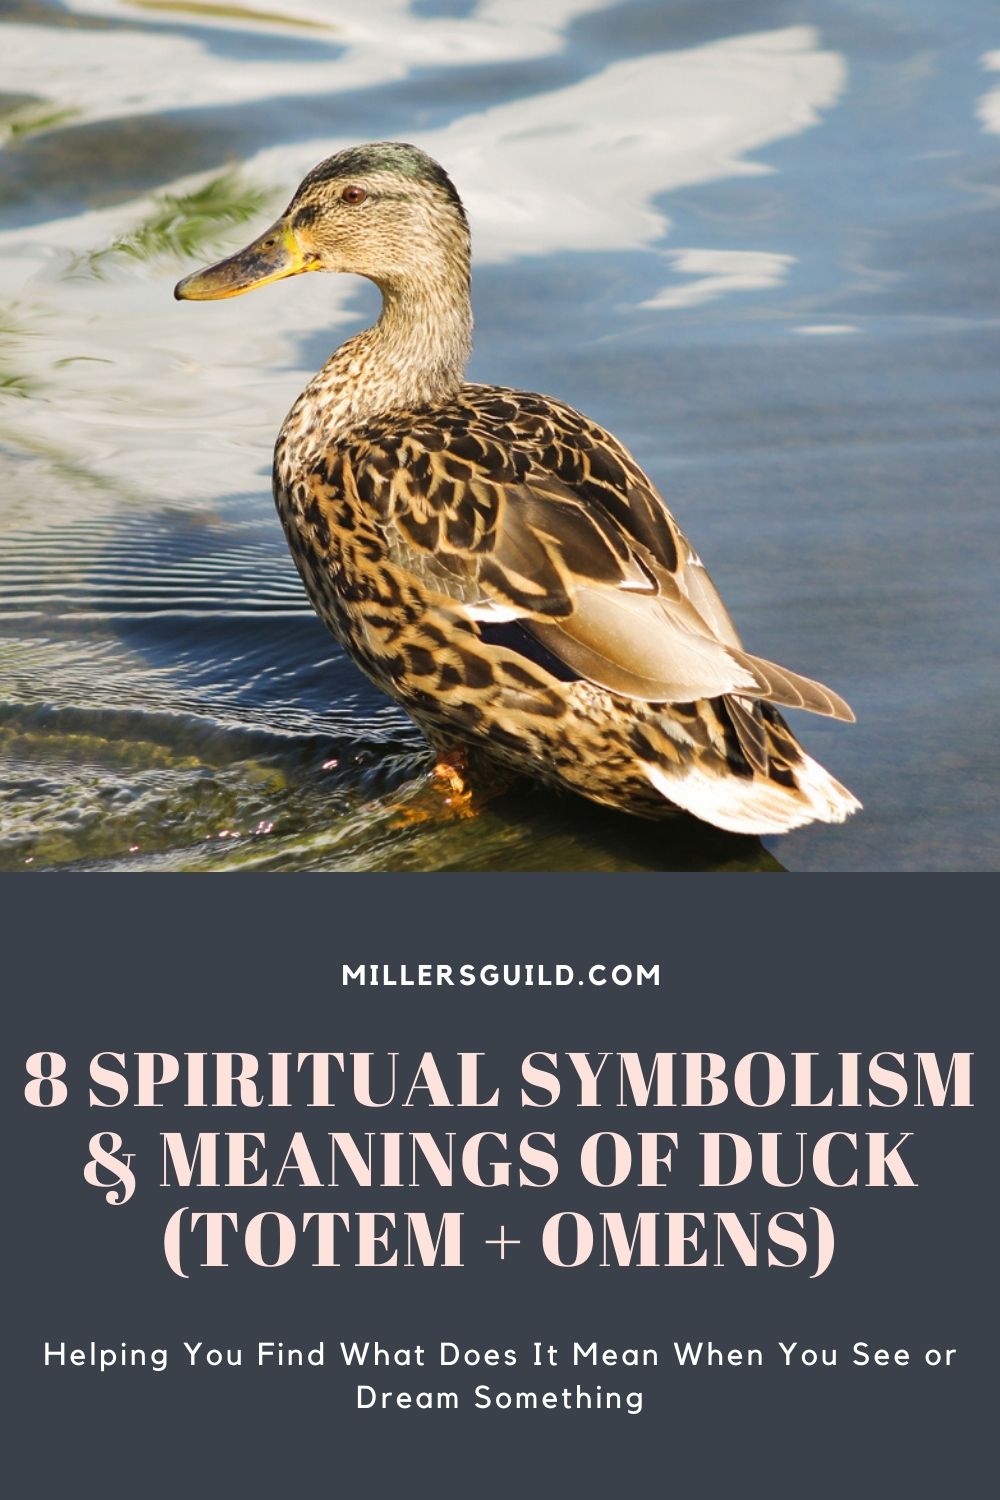 8 Spiritual Symbolism & Meanings of Duck (Totem + Omens) 2